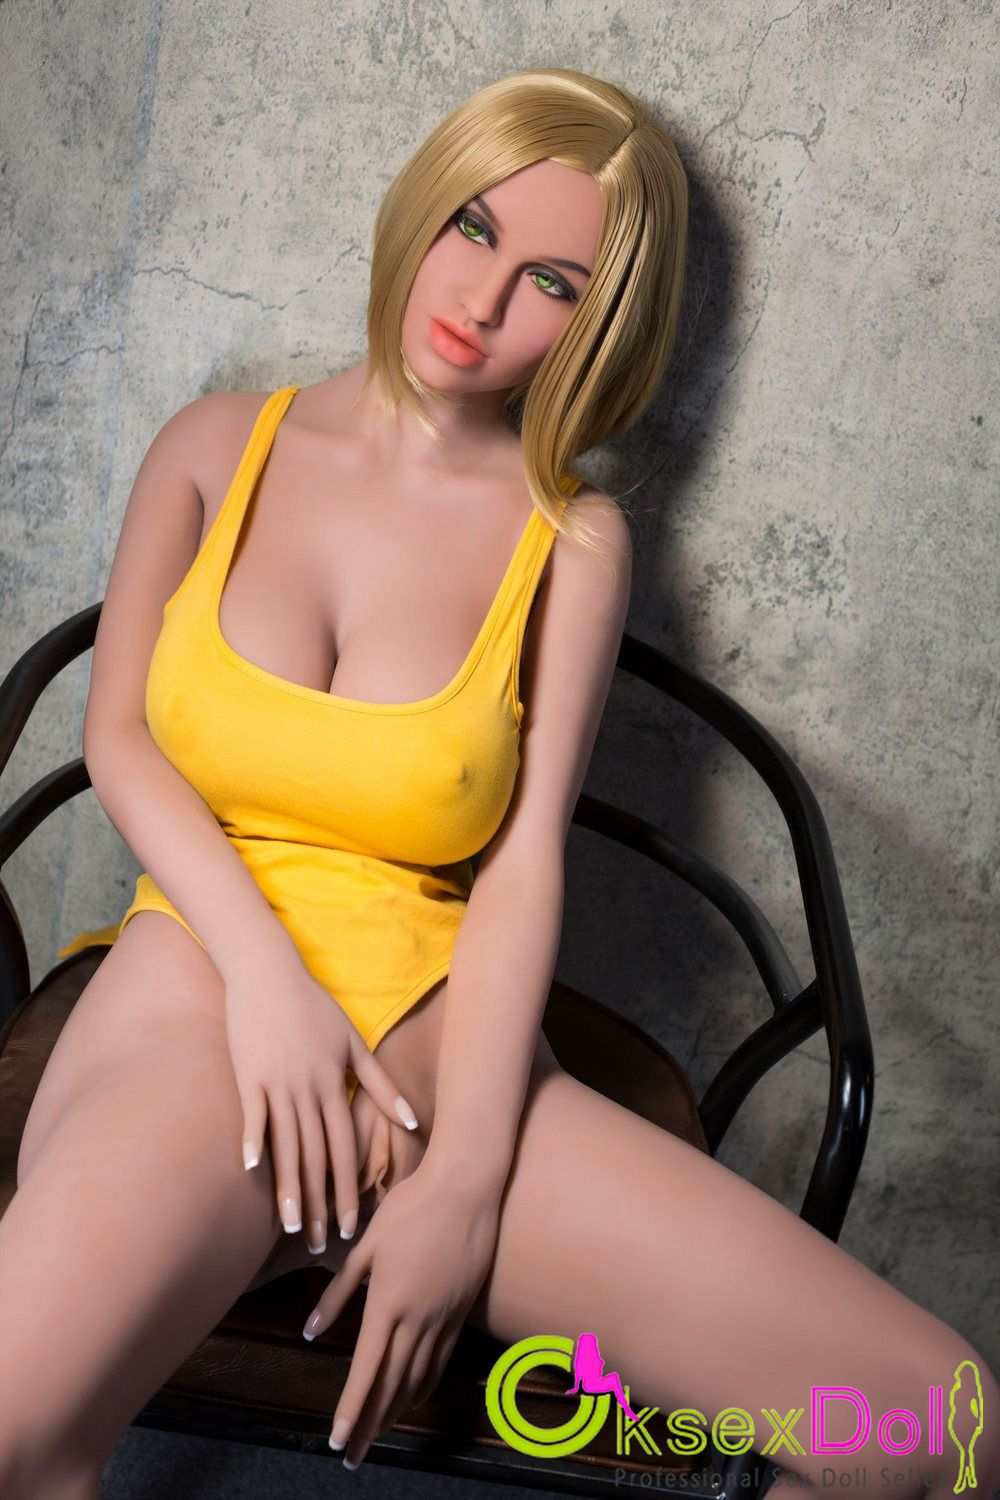 Huge Breast real doll Photos